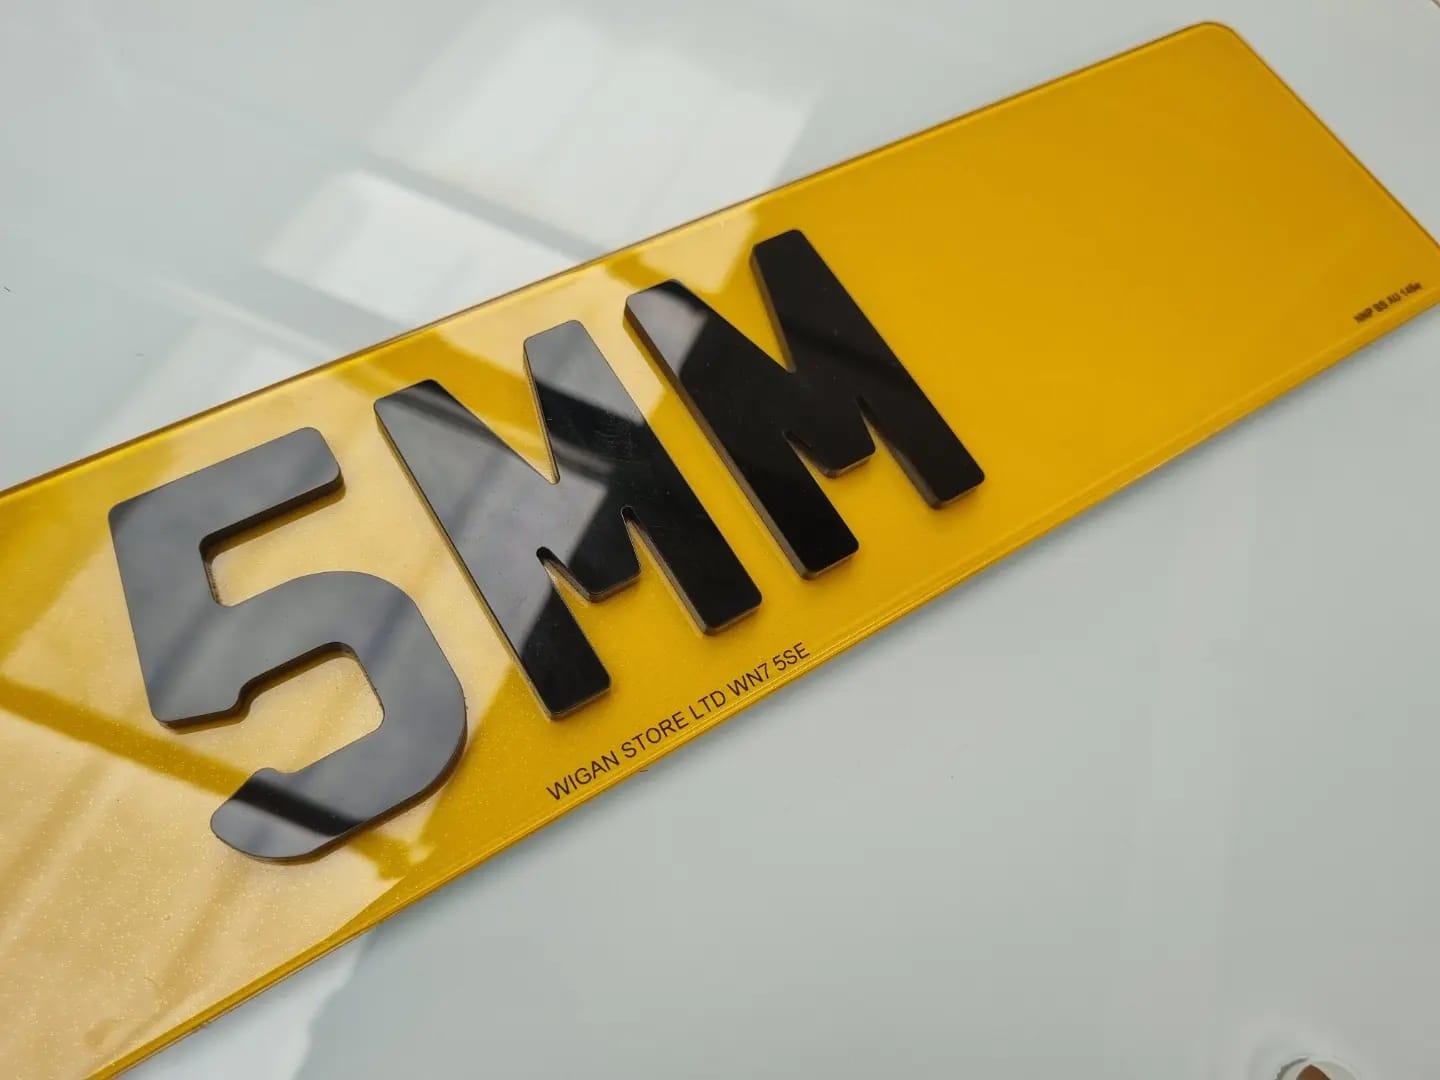 Rear 4d 5mm acrylic number plate maker in Leigh www.leighnumberplates.com